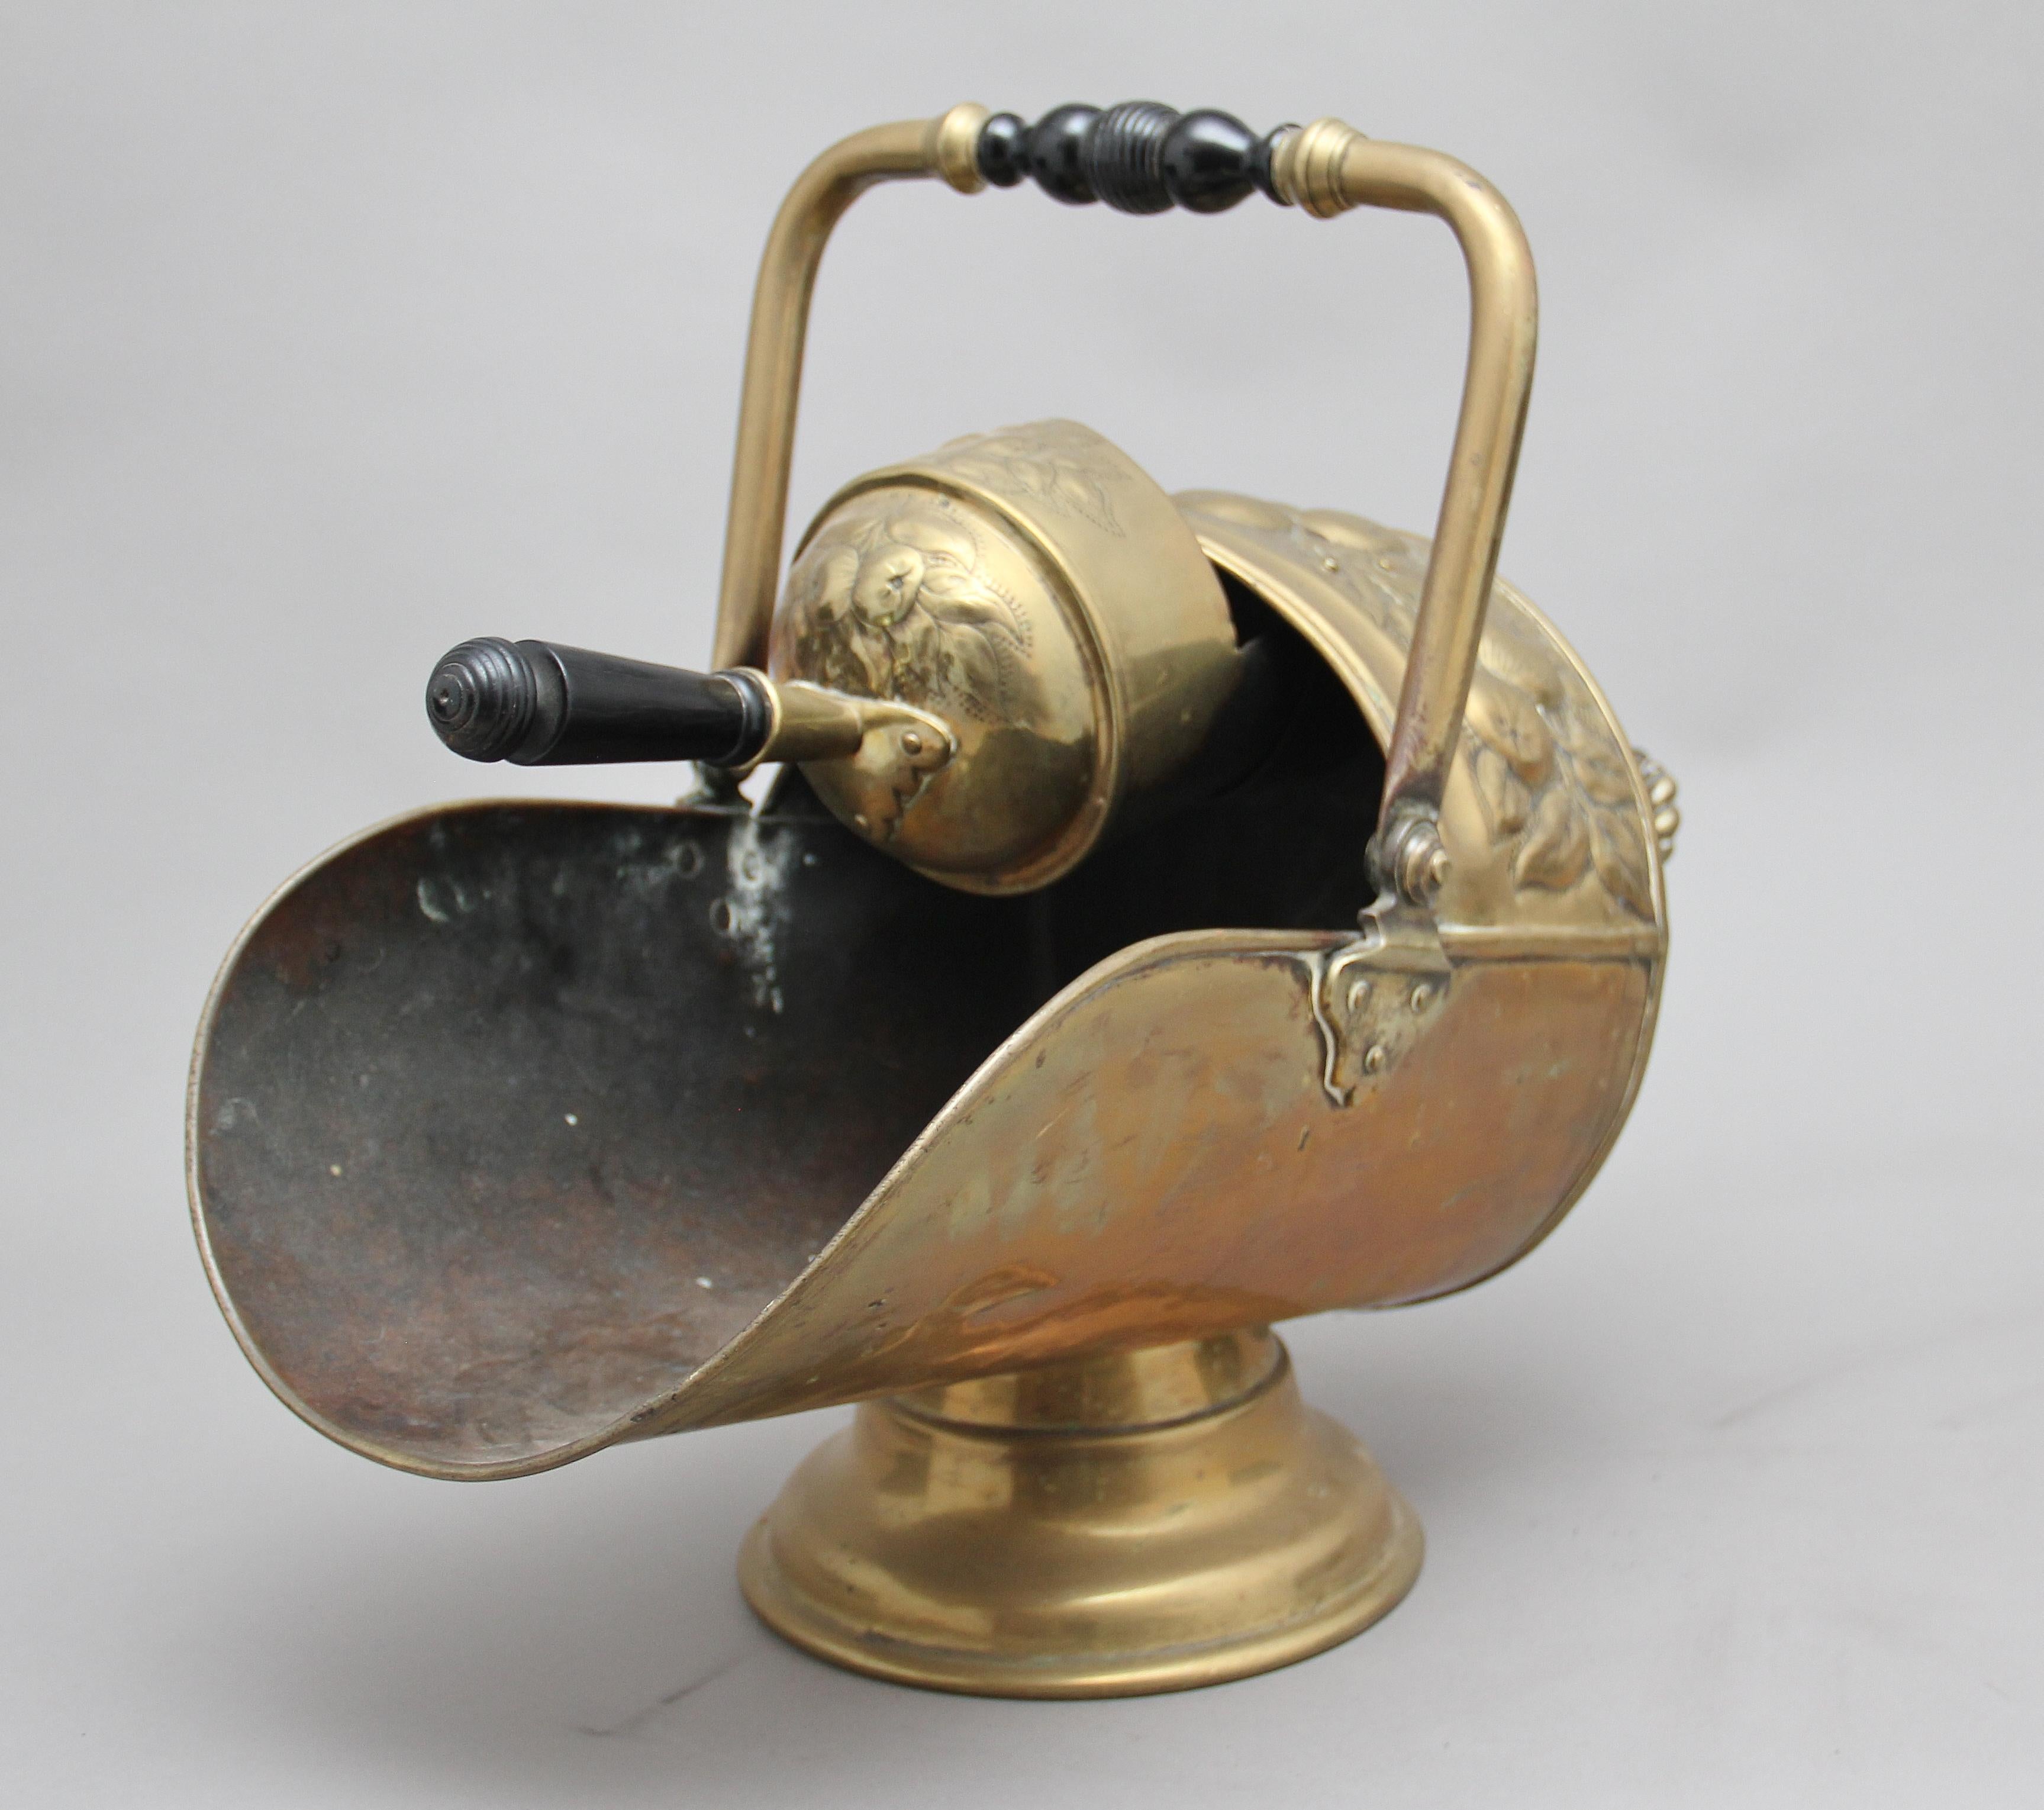 Victorian 19th Century Brass Coal Scuttle and Shovel